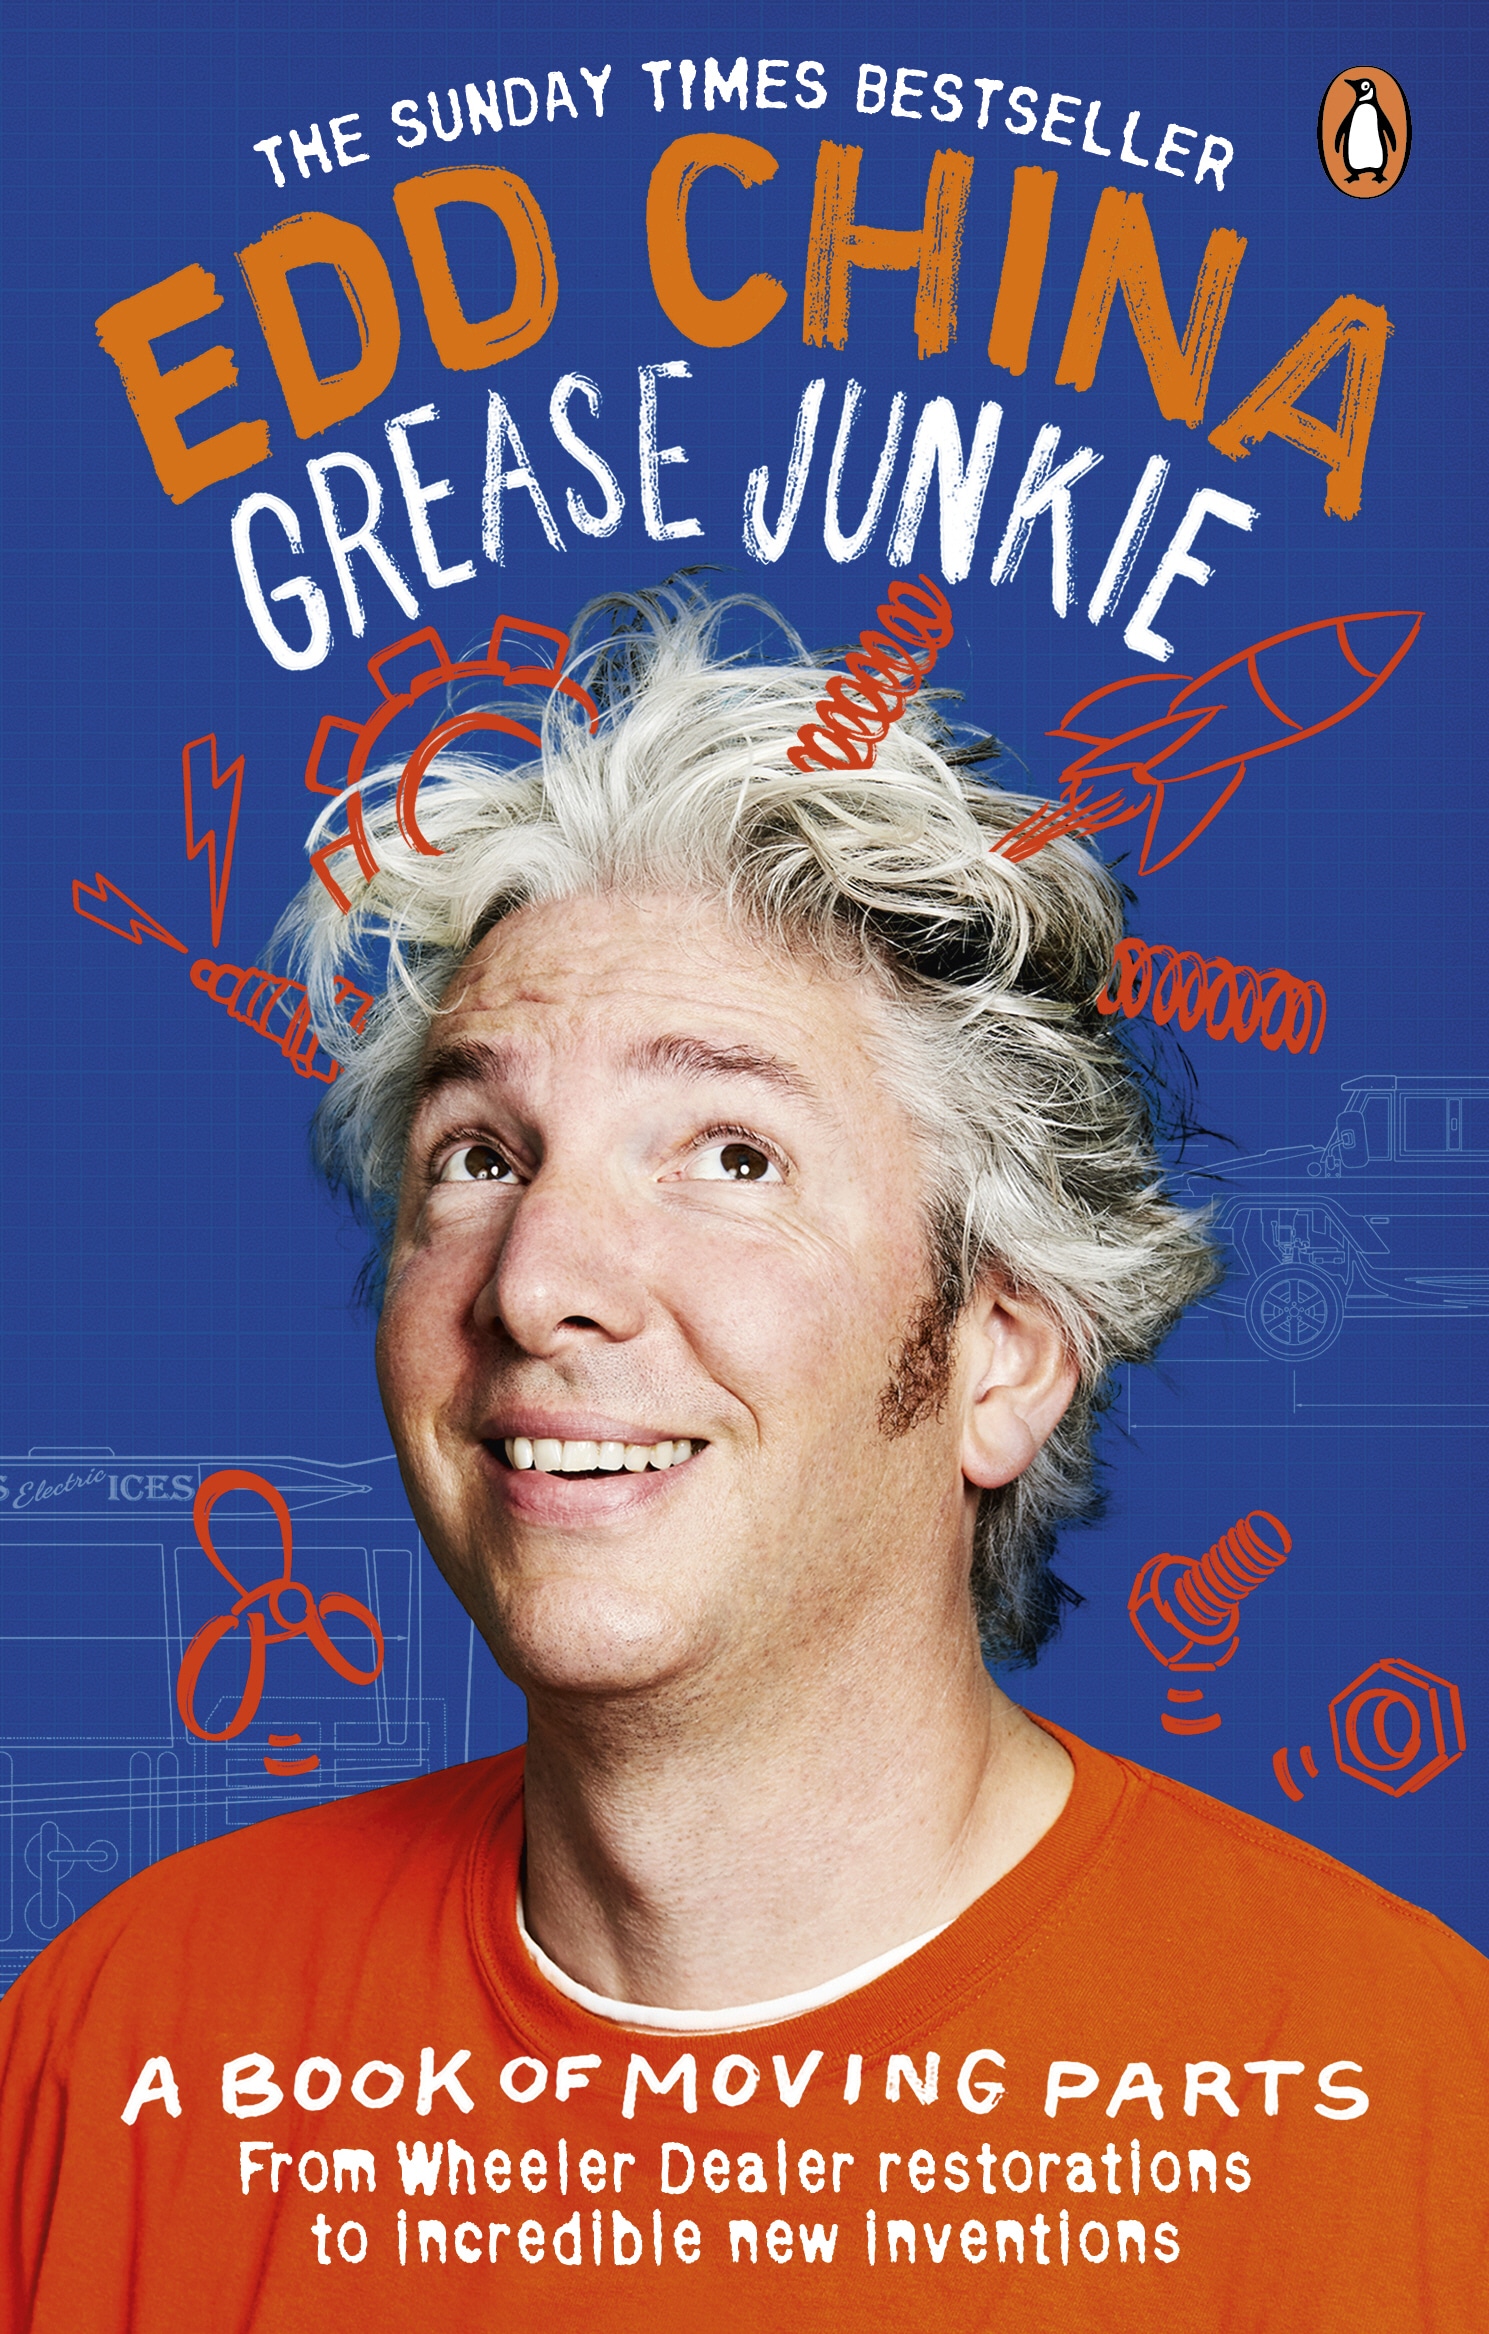 Book “Grease Junkie” by Edd China — April 2, 2020